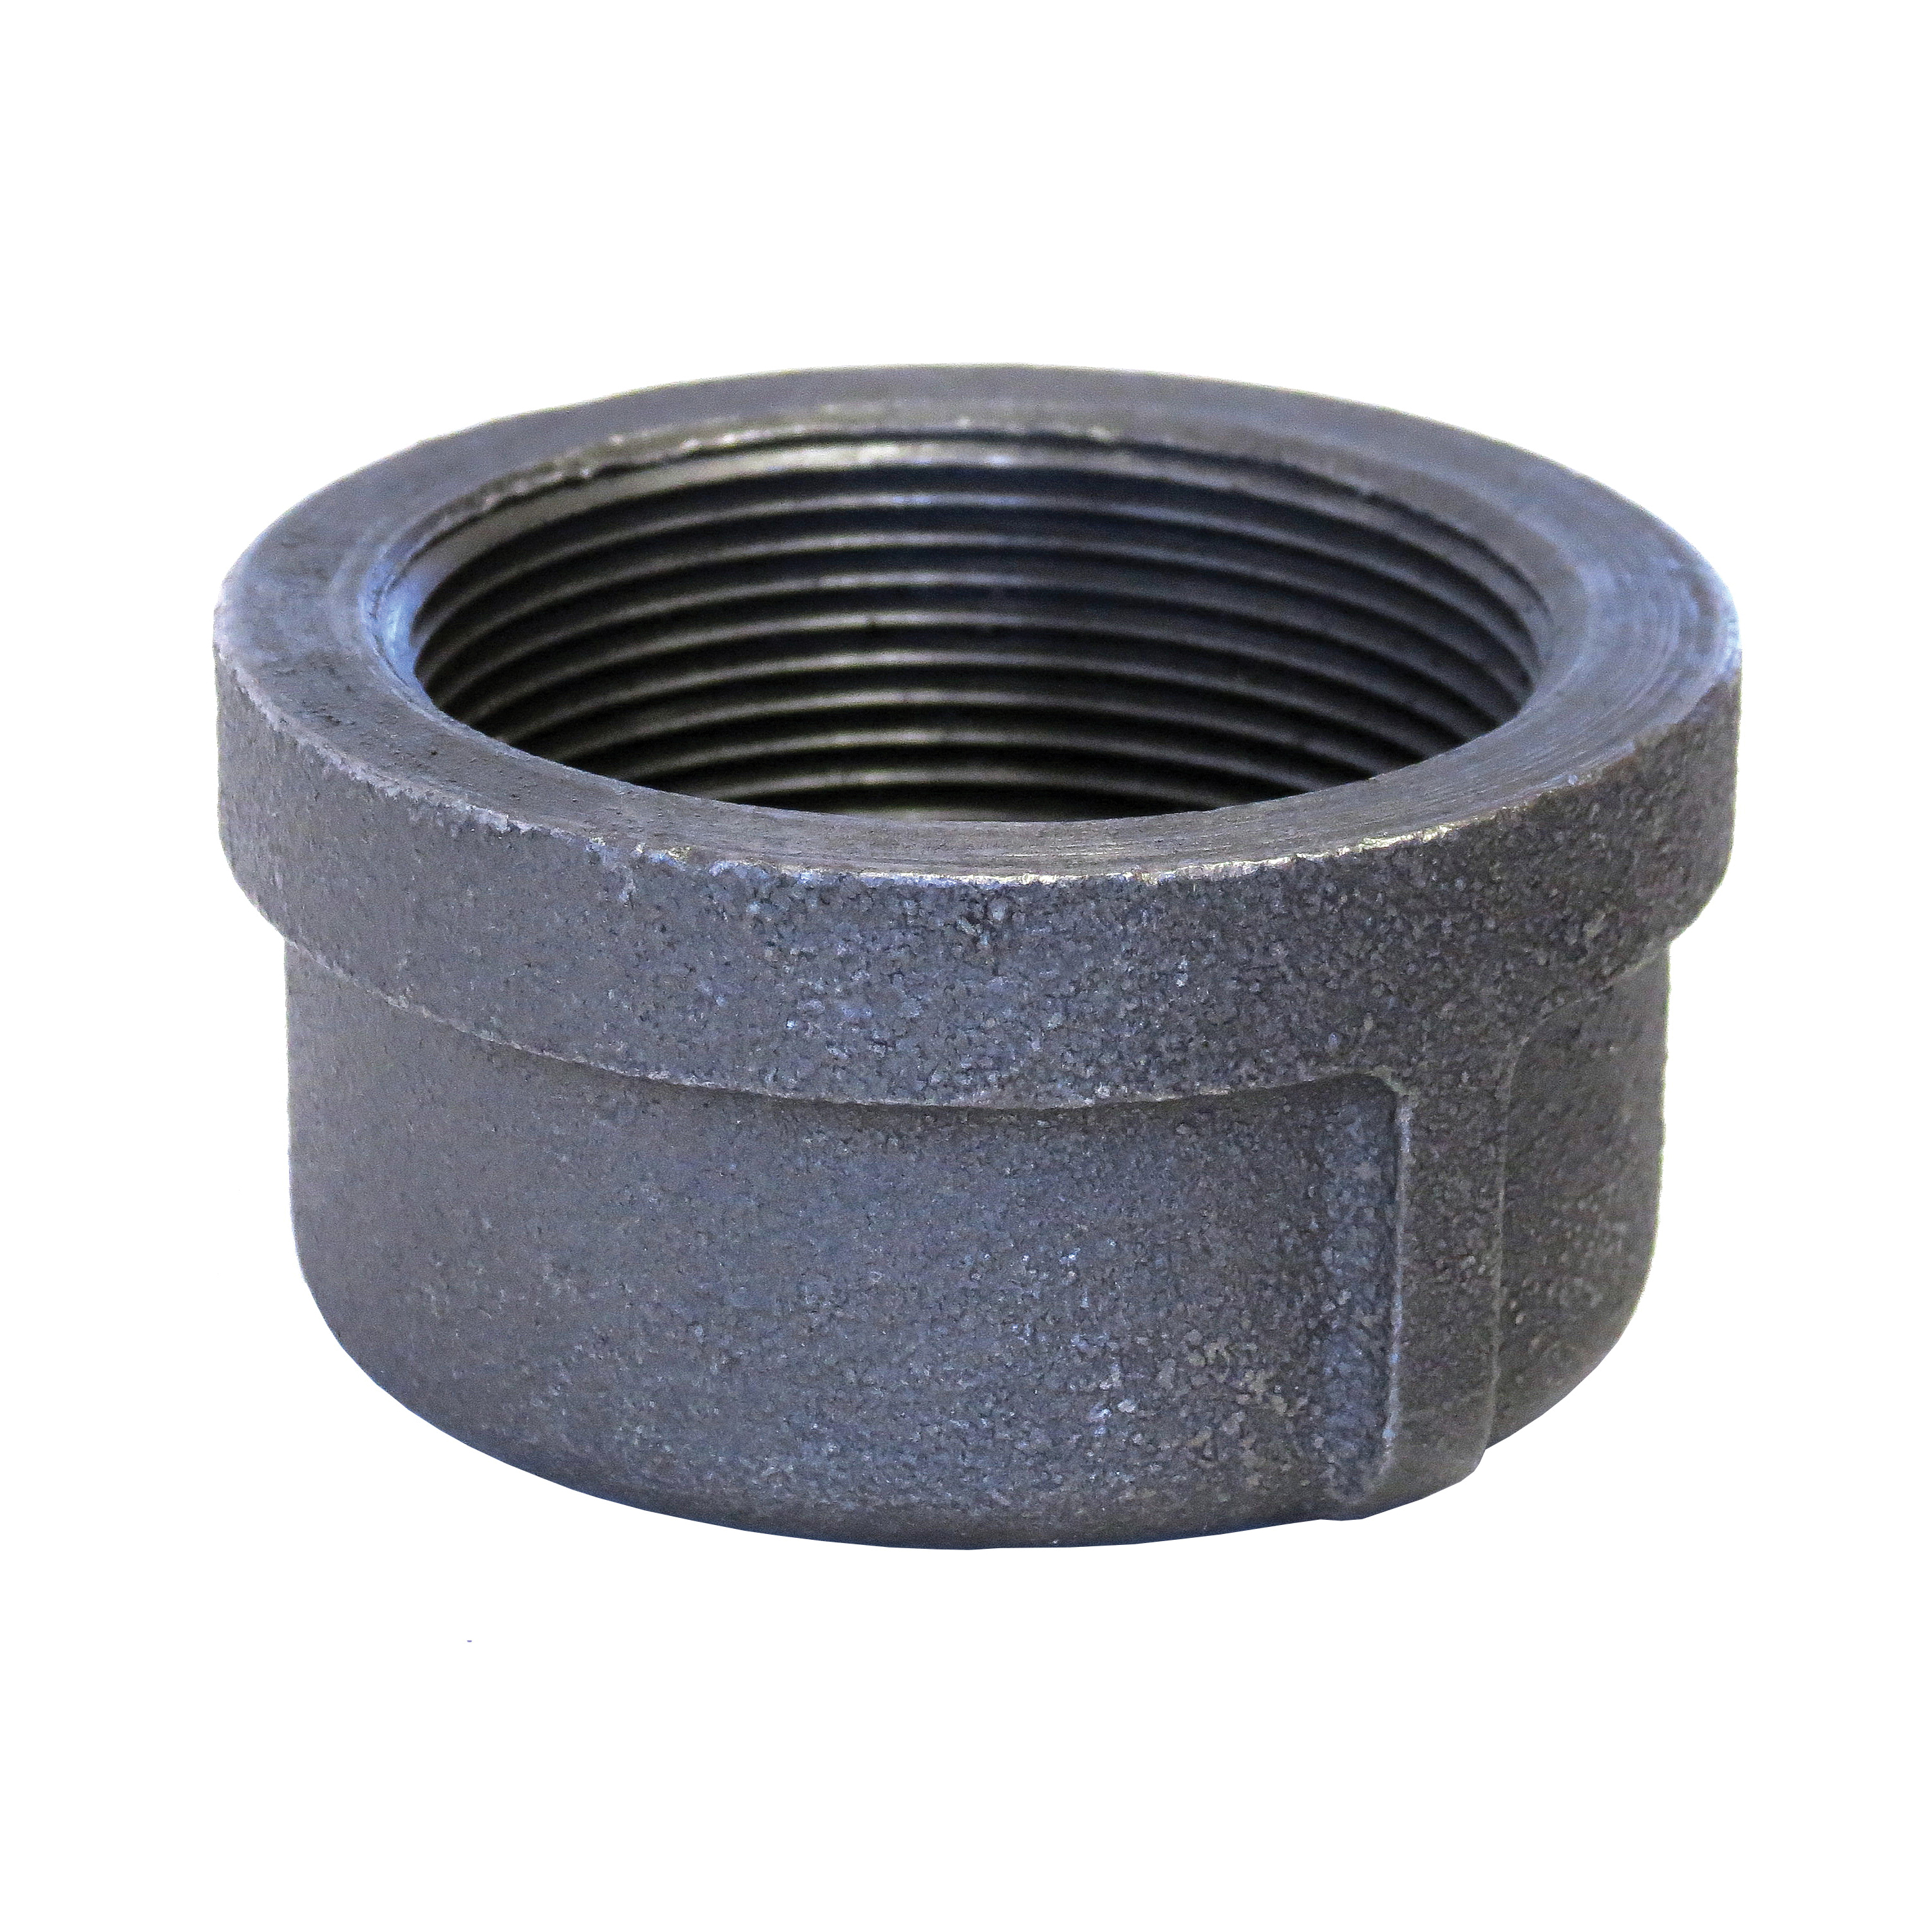 Anvil® 0319900569 FIG 1124 Standard Pipe Cap, 3/4 in Nominal, FNPT End Style, 150 lb, Malleable Iron, Galvanized, Domestic